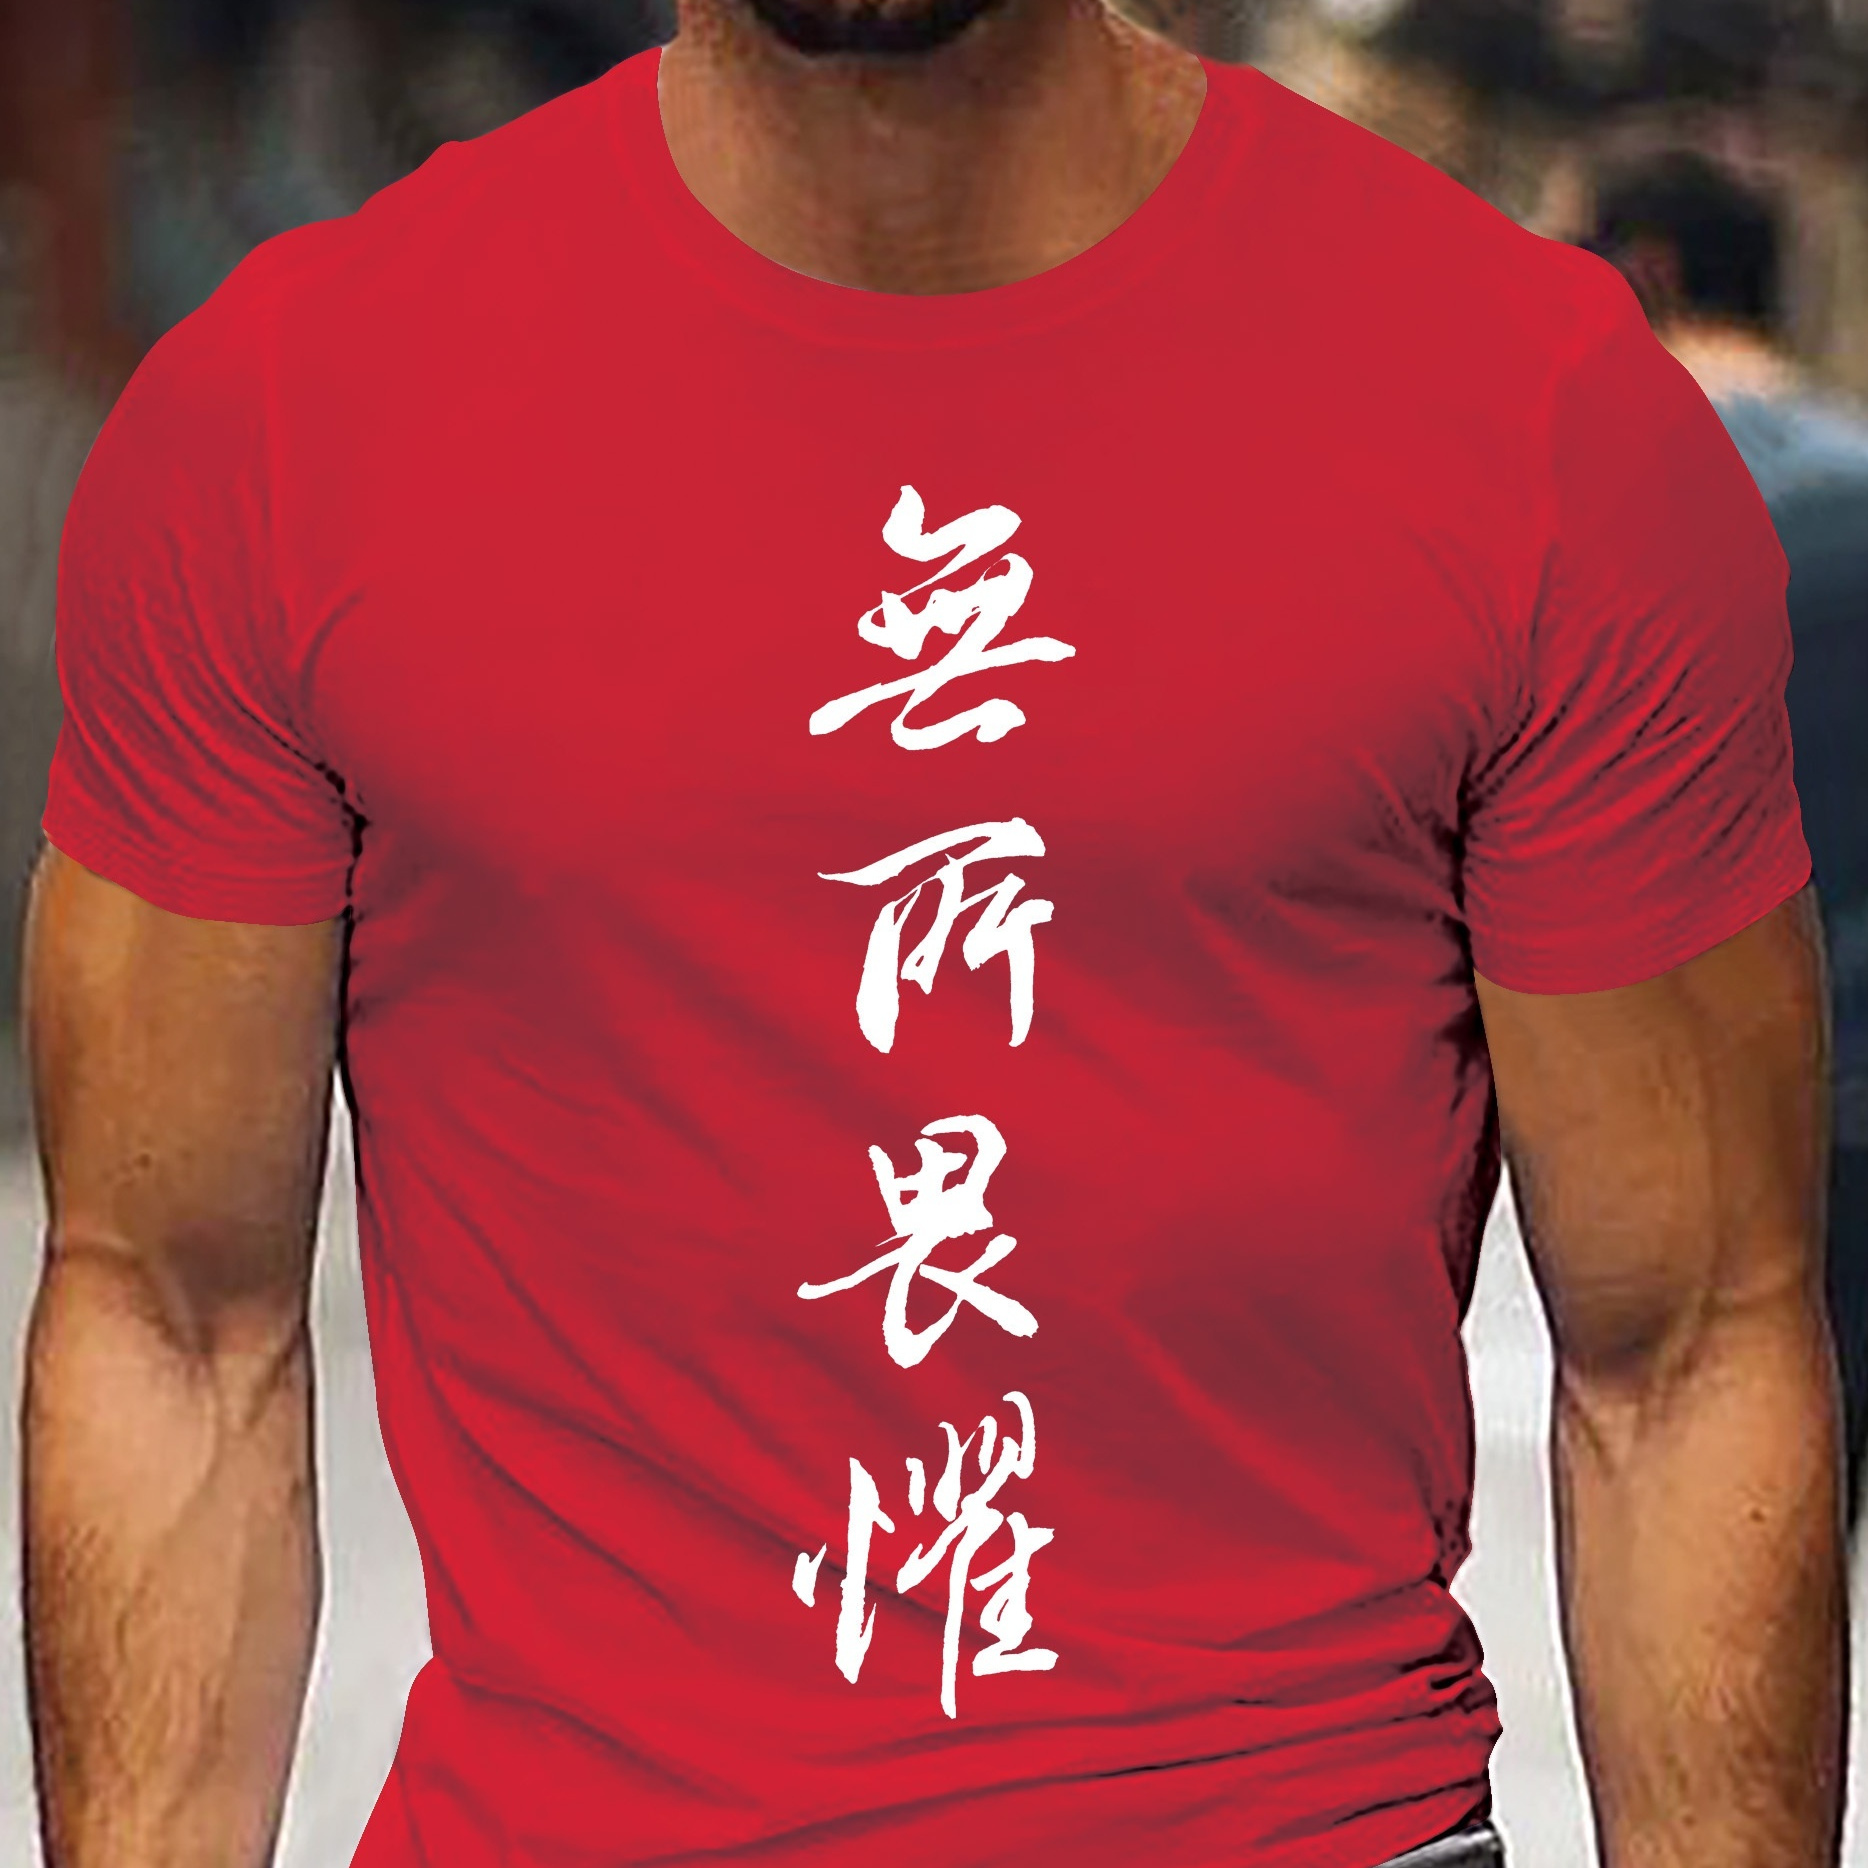 

Chinese Slogan Graphic Men's Short Sleeve T-shirt, Comfy Stretchy Trendy Tees For Summer, Casual Daily Style Fashion Clothing